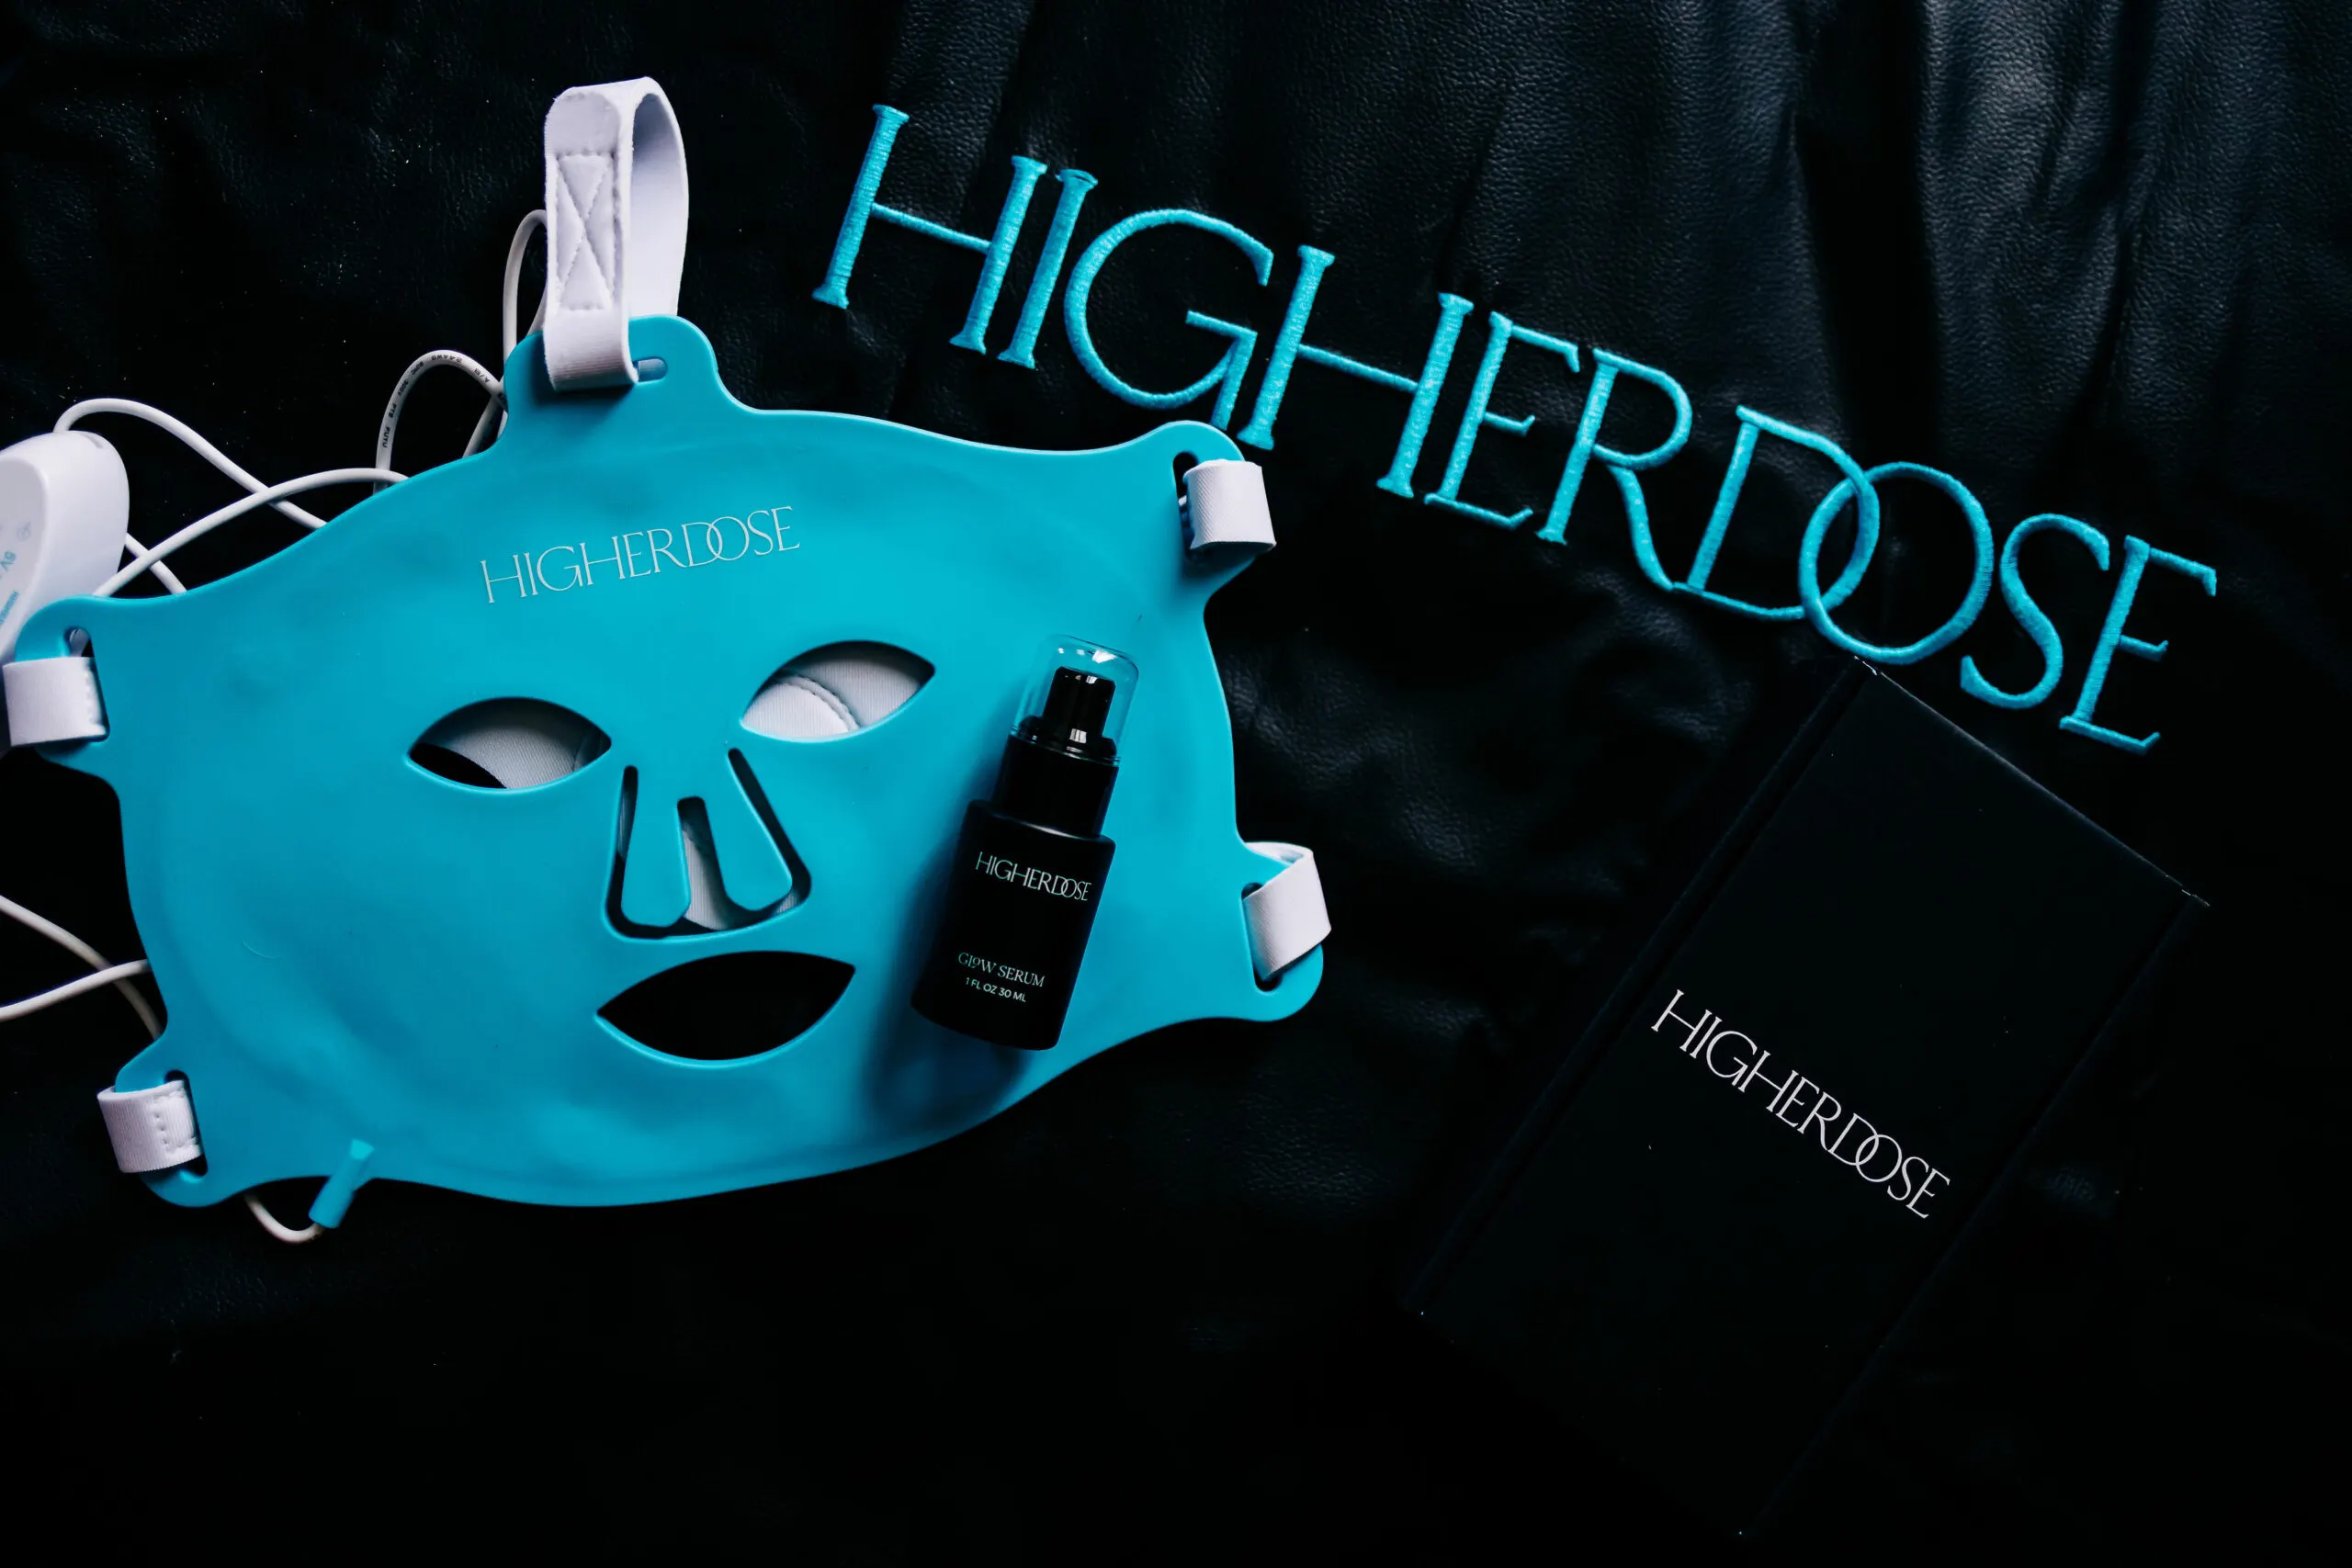 Higherdose products